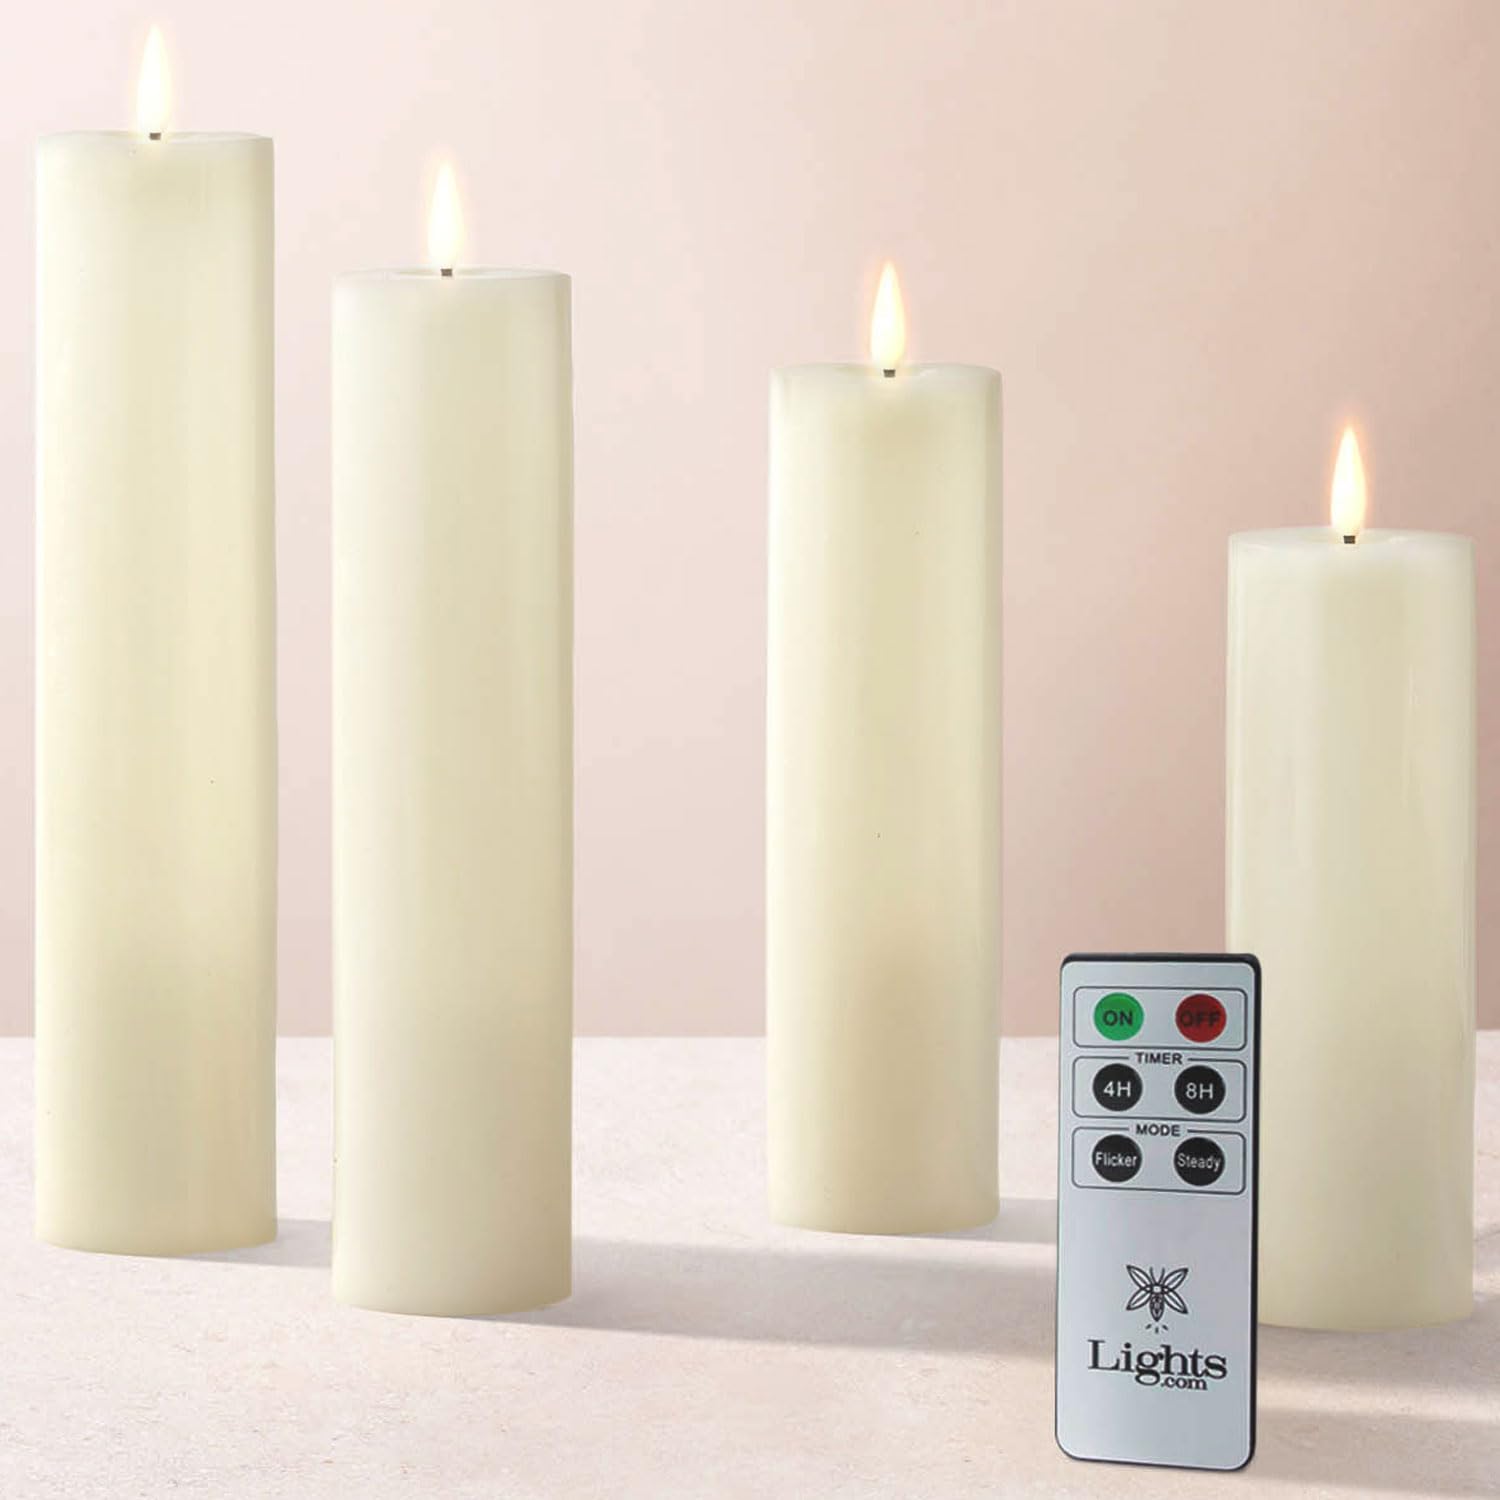 Flameless Pillar Candles, 2 Inch Diameter - 4 Pack, Remote Control and Batteries Included, Assorted Height, Flickering 3D LED Flame, Ivory Wax, Realistic Slim Pillar Candles for Valentines Day Decor